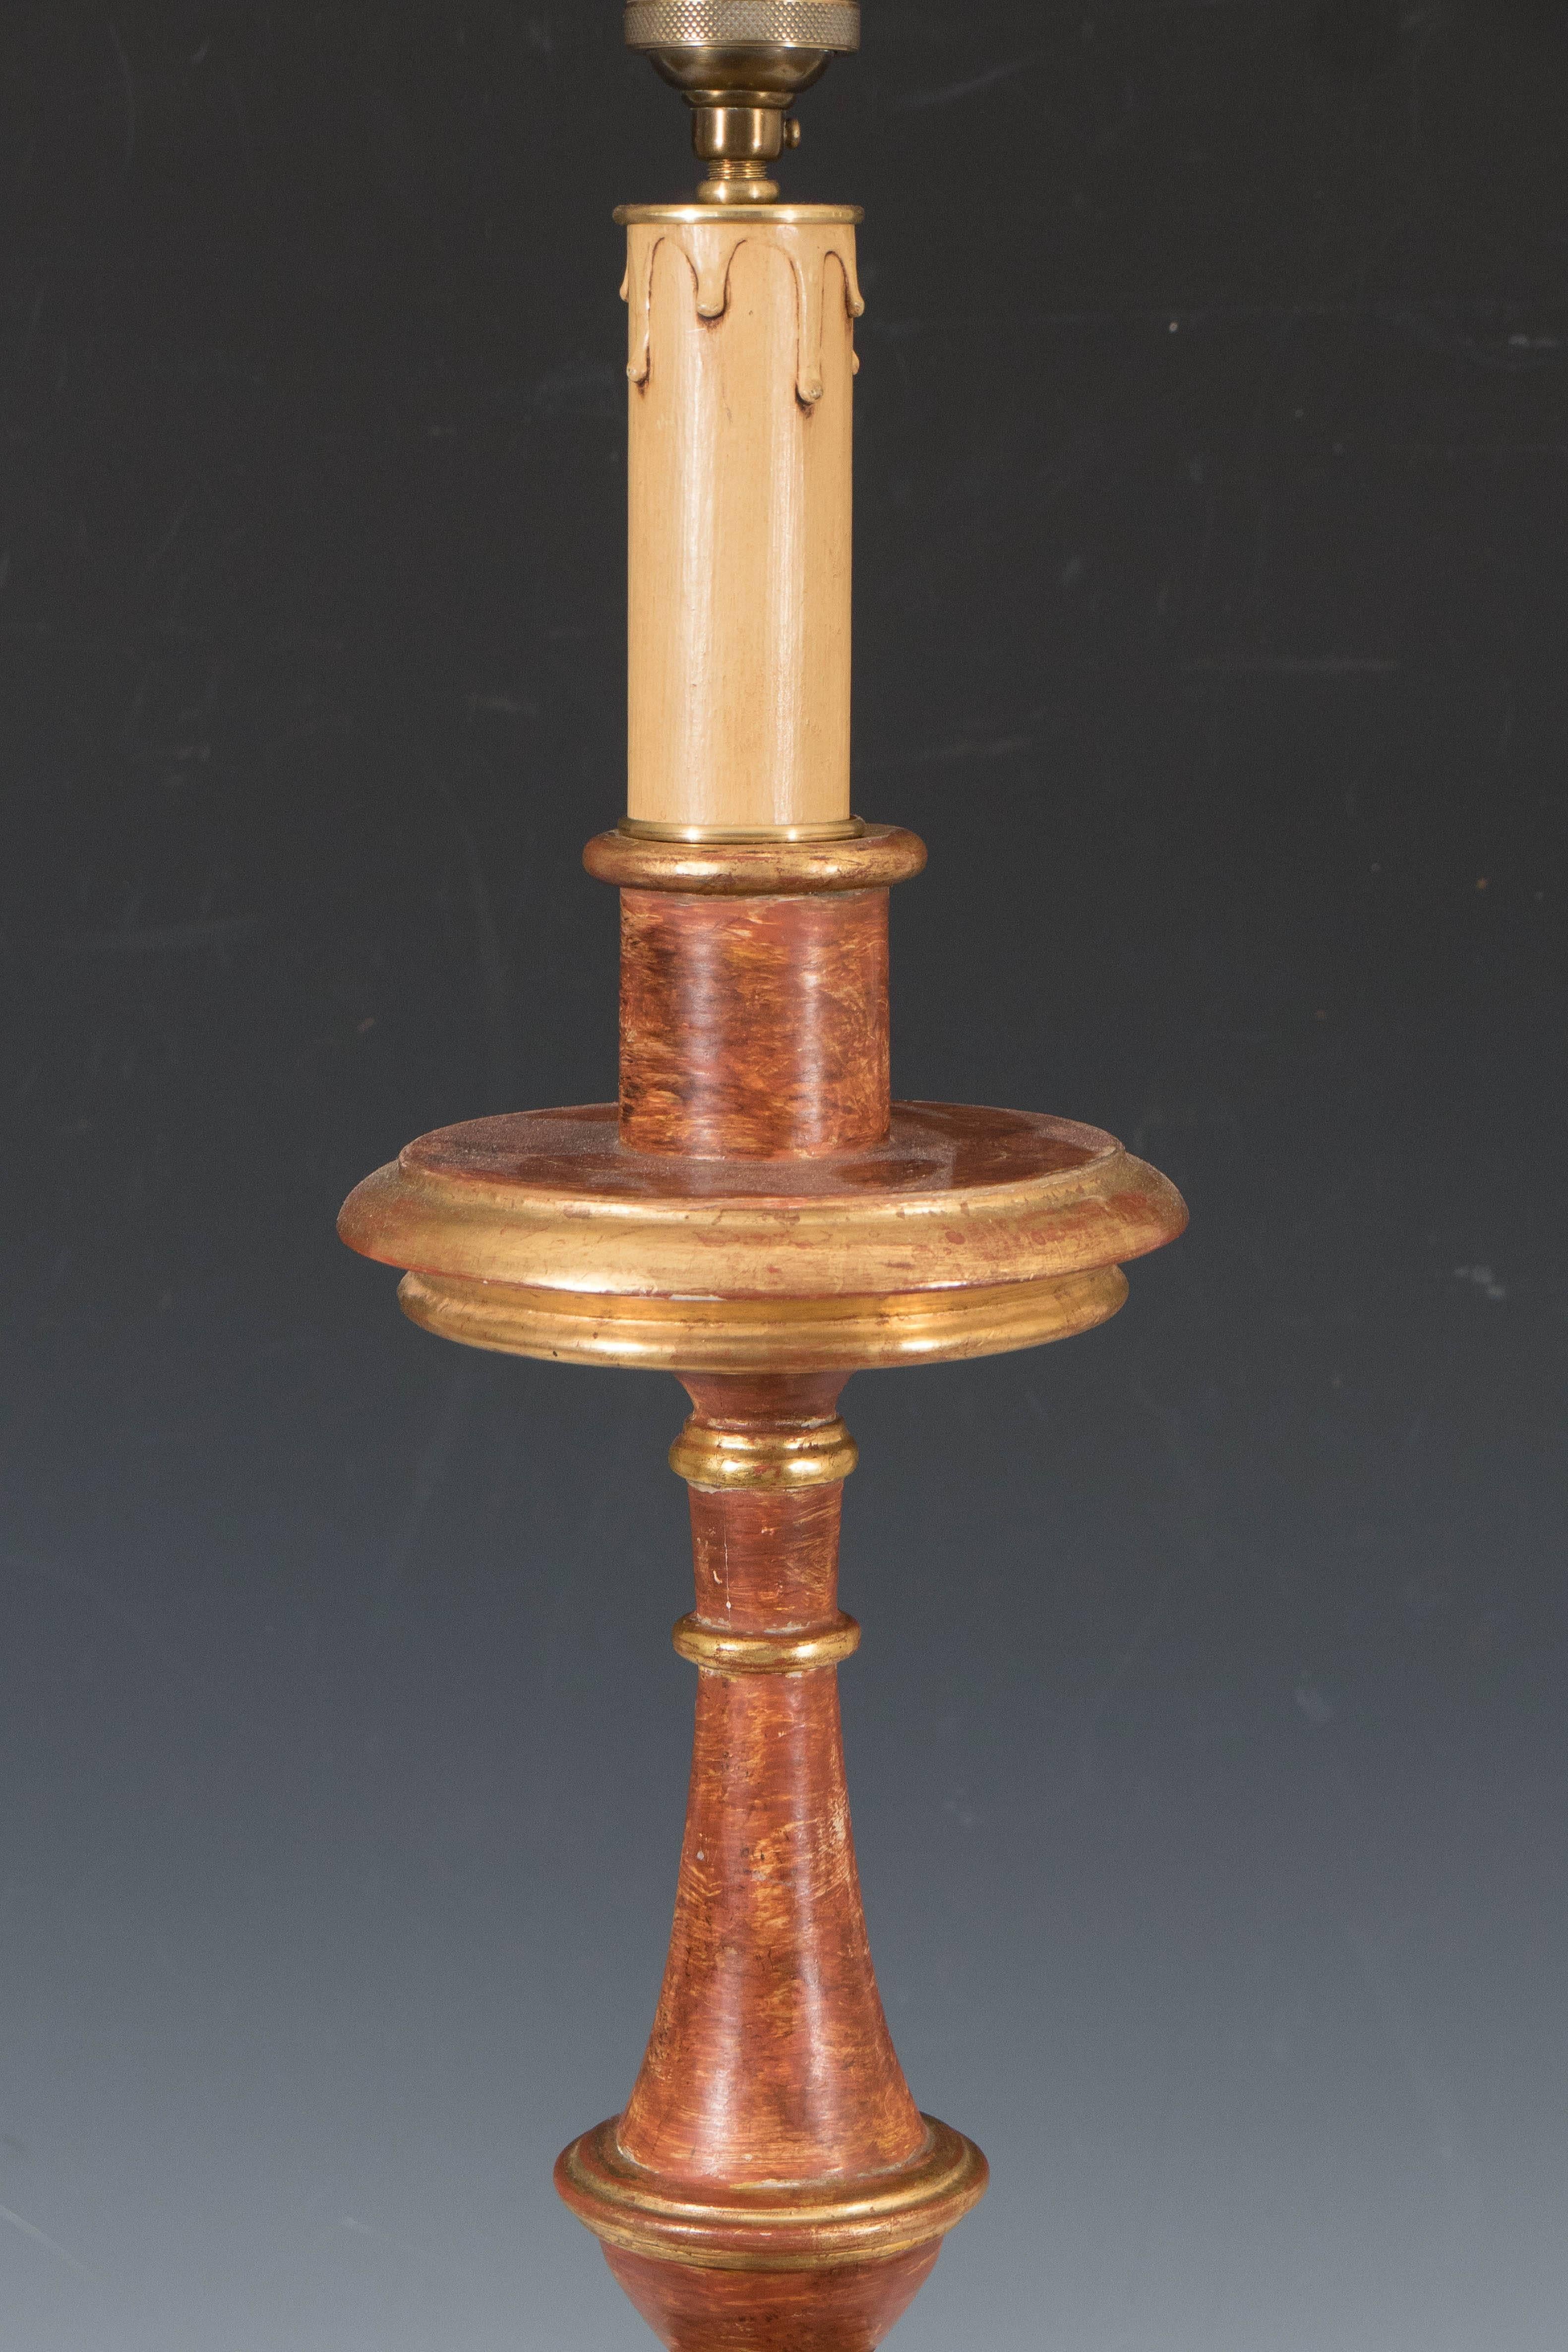 Gilt Pair of Early 20th Century Italian Gilded and Painted Candlestick Lamps